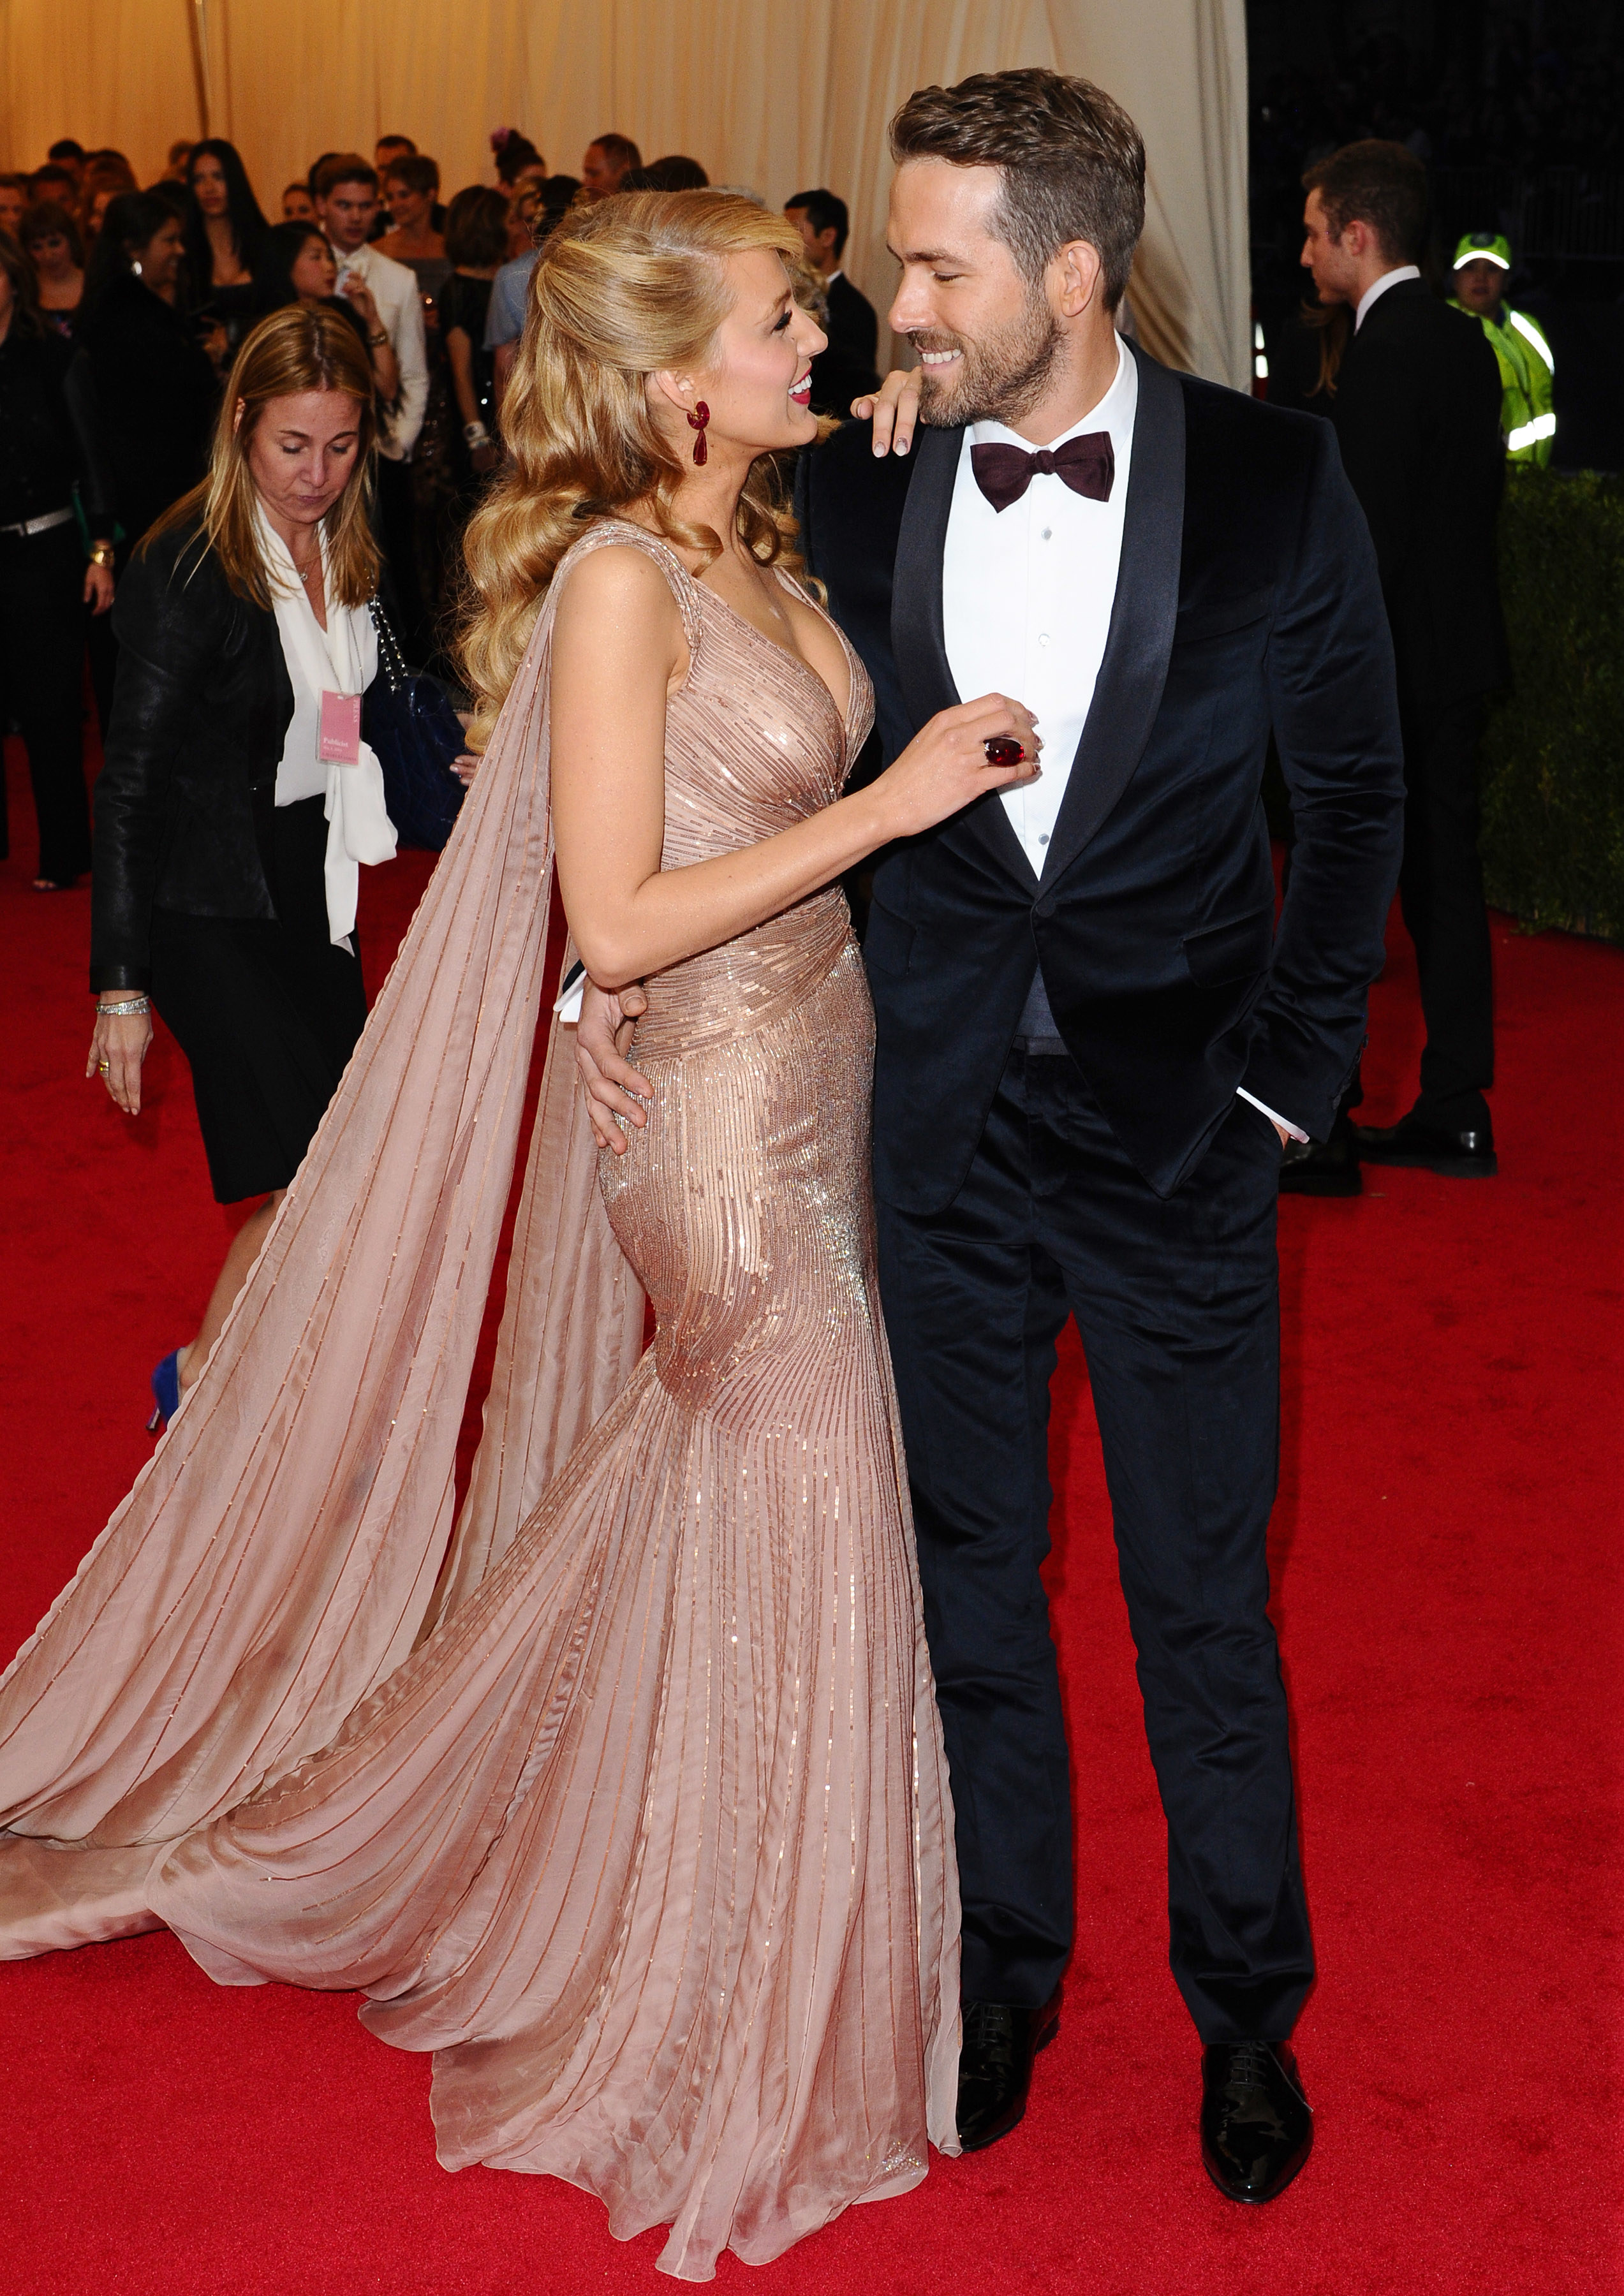 Blake Lively and Ryan Reynolds gazing at each other at the Met Gala